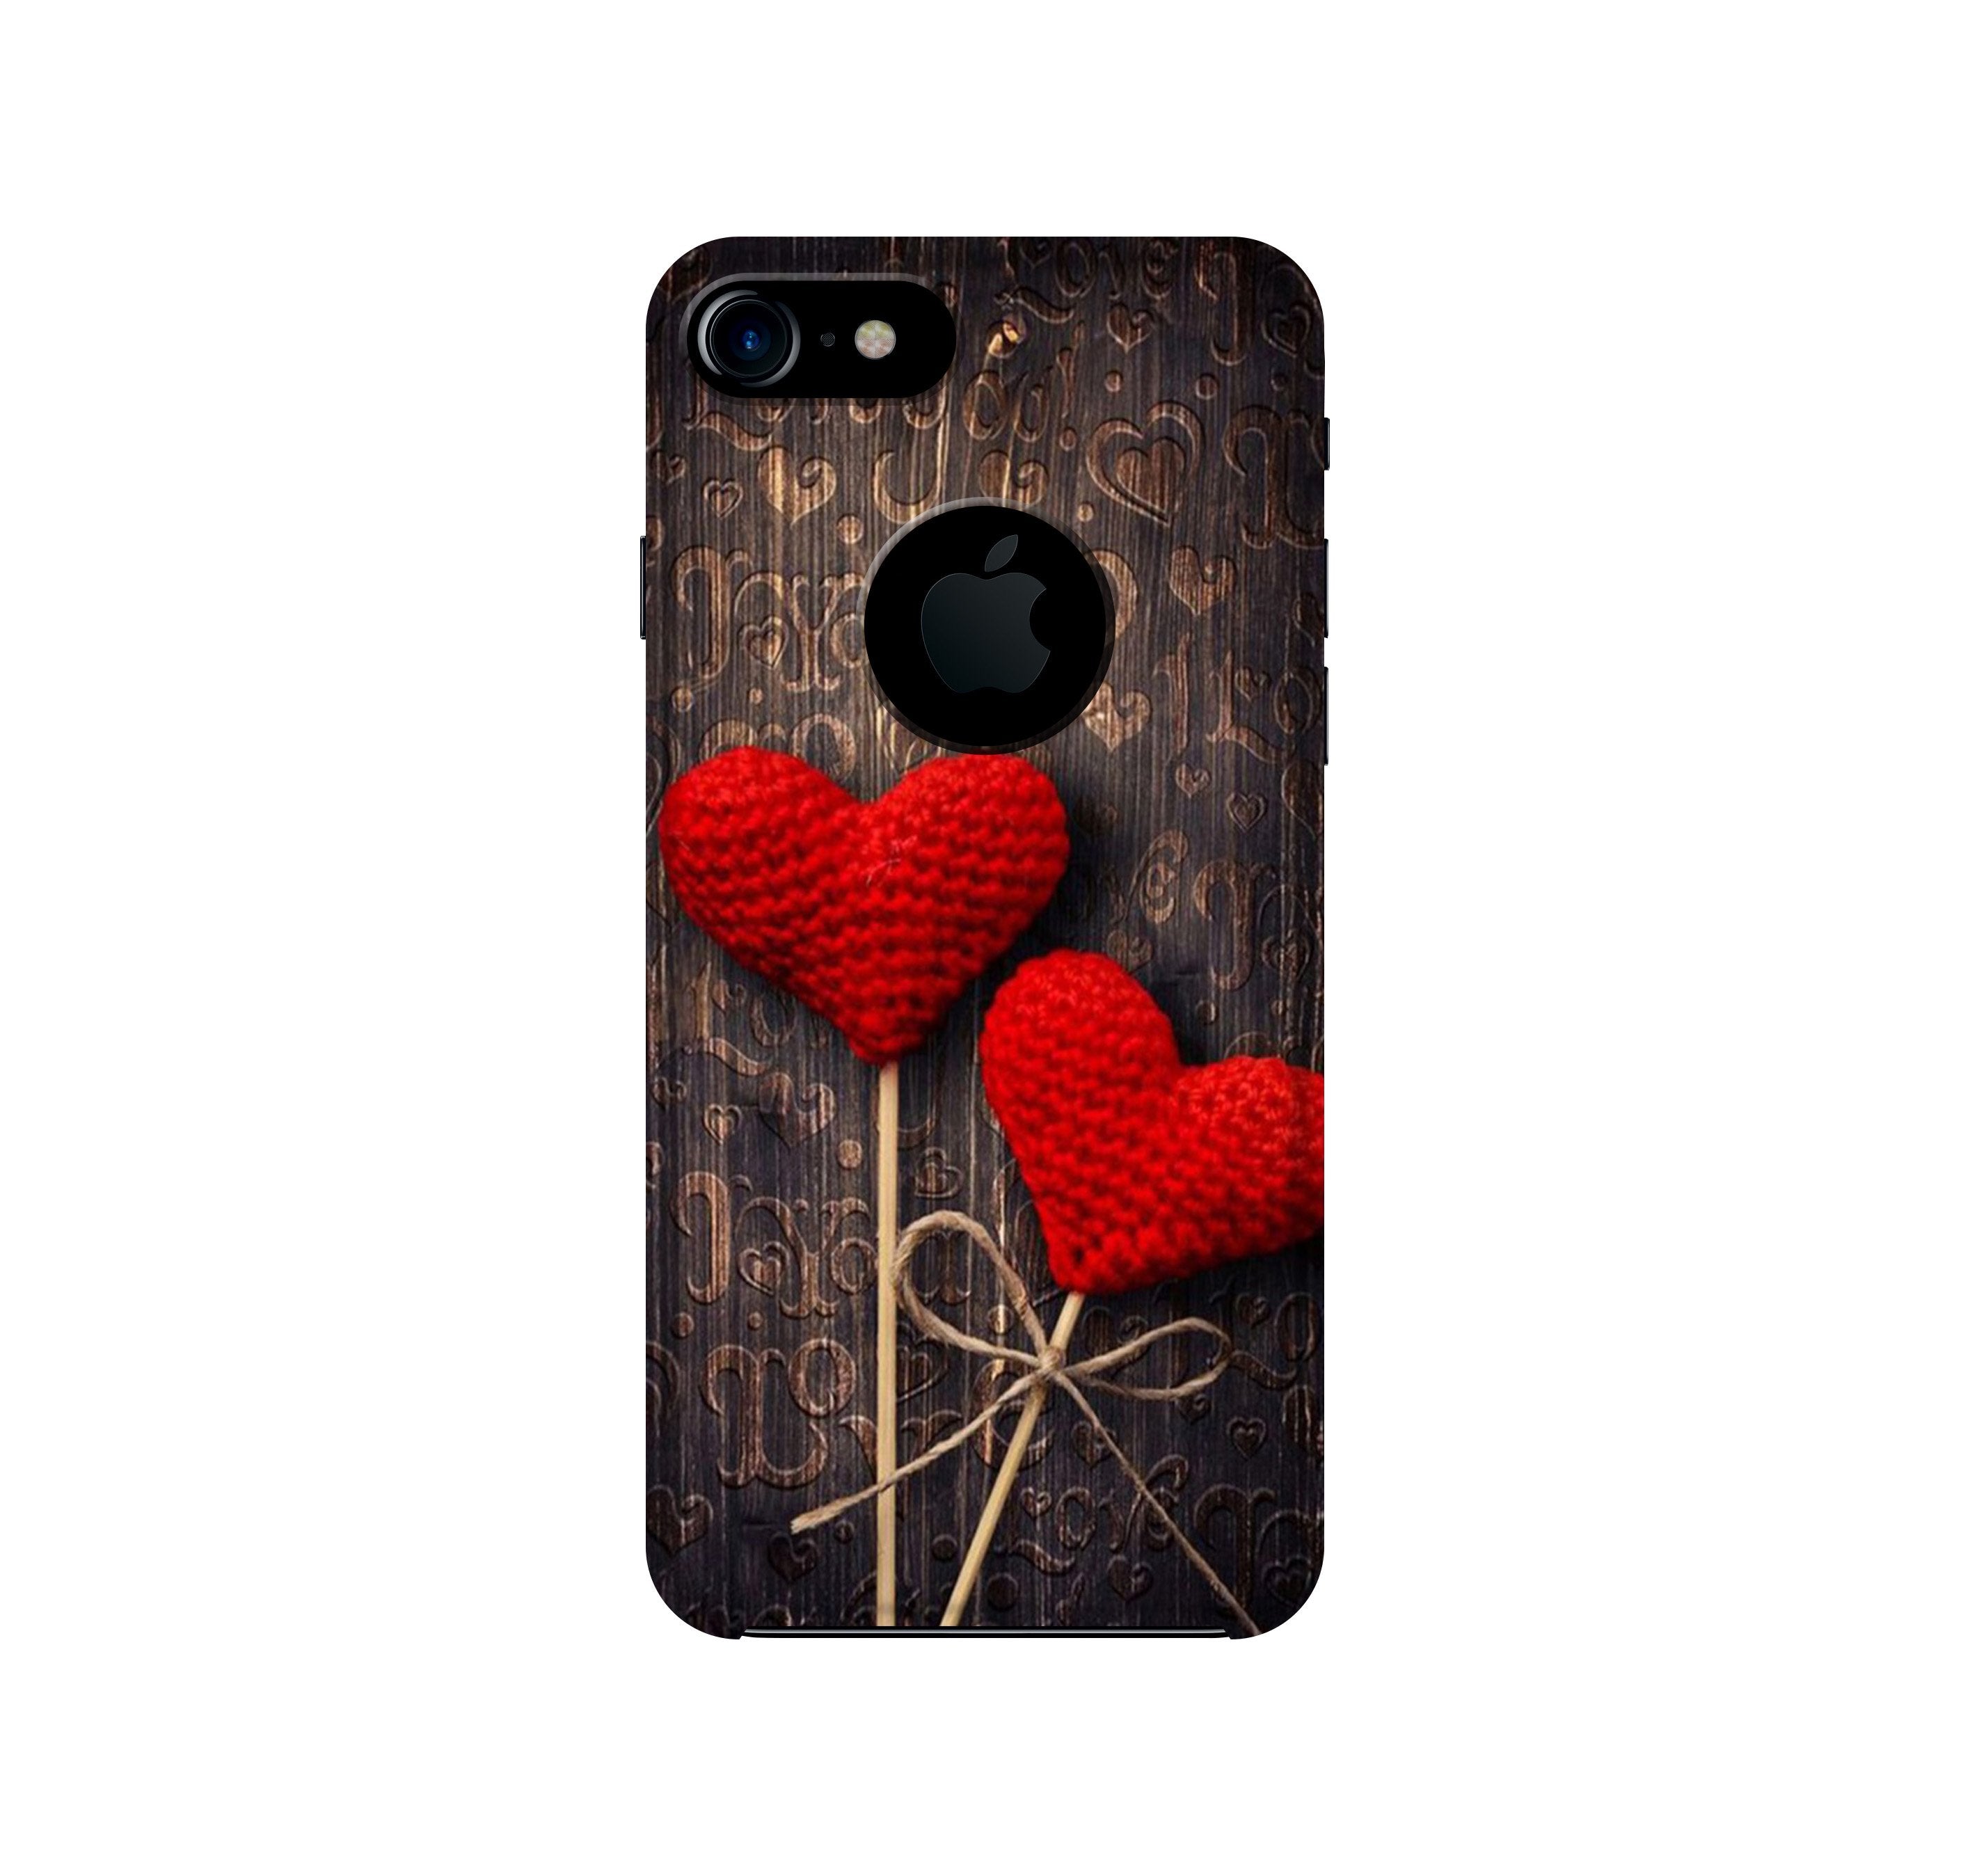 Red Hearts Case for iPhone 7 logo cut